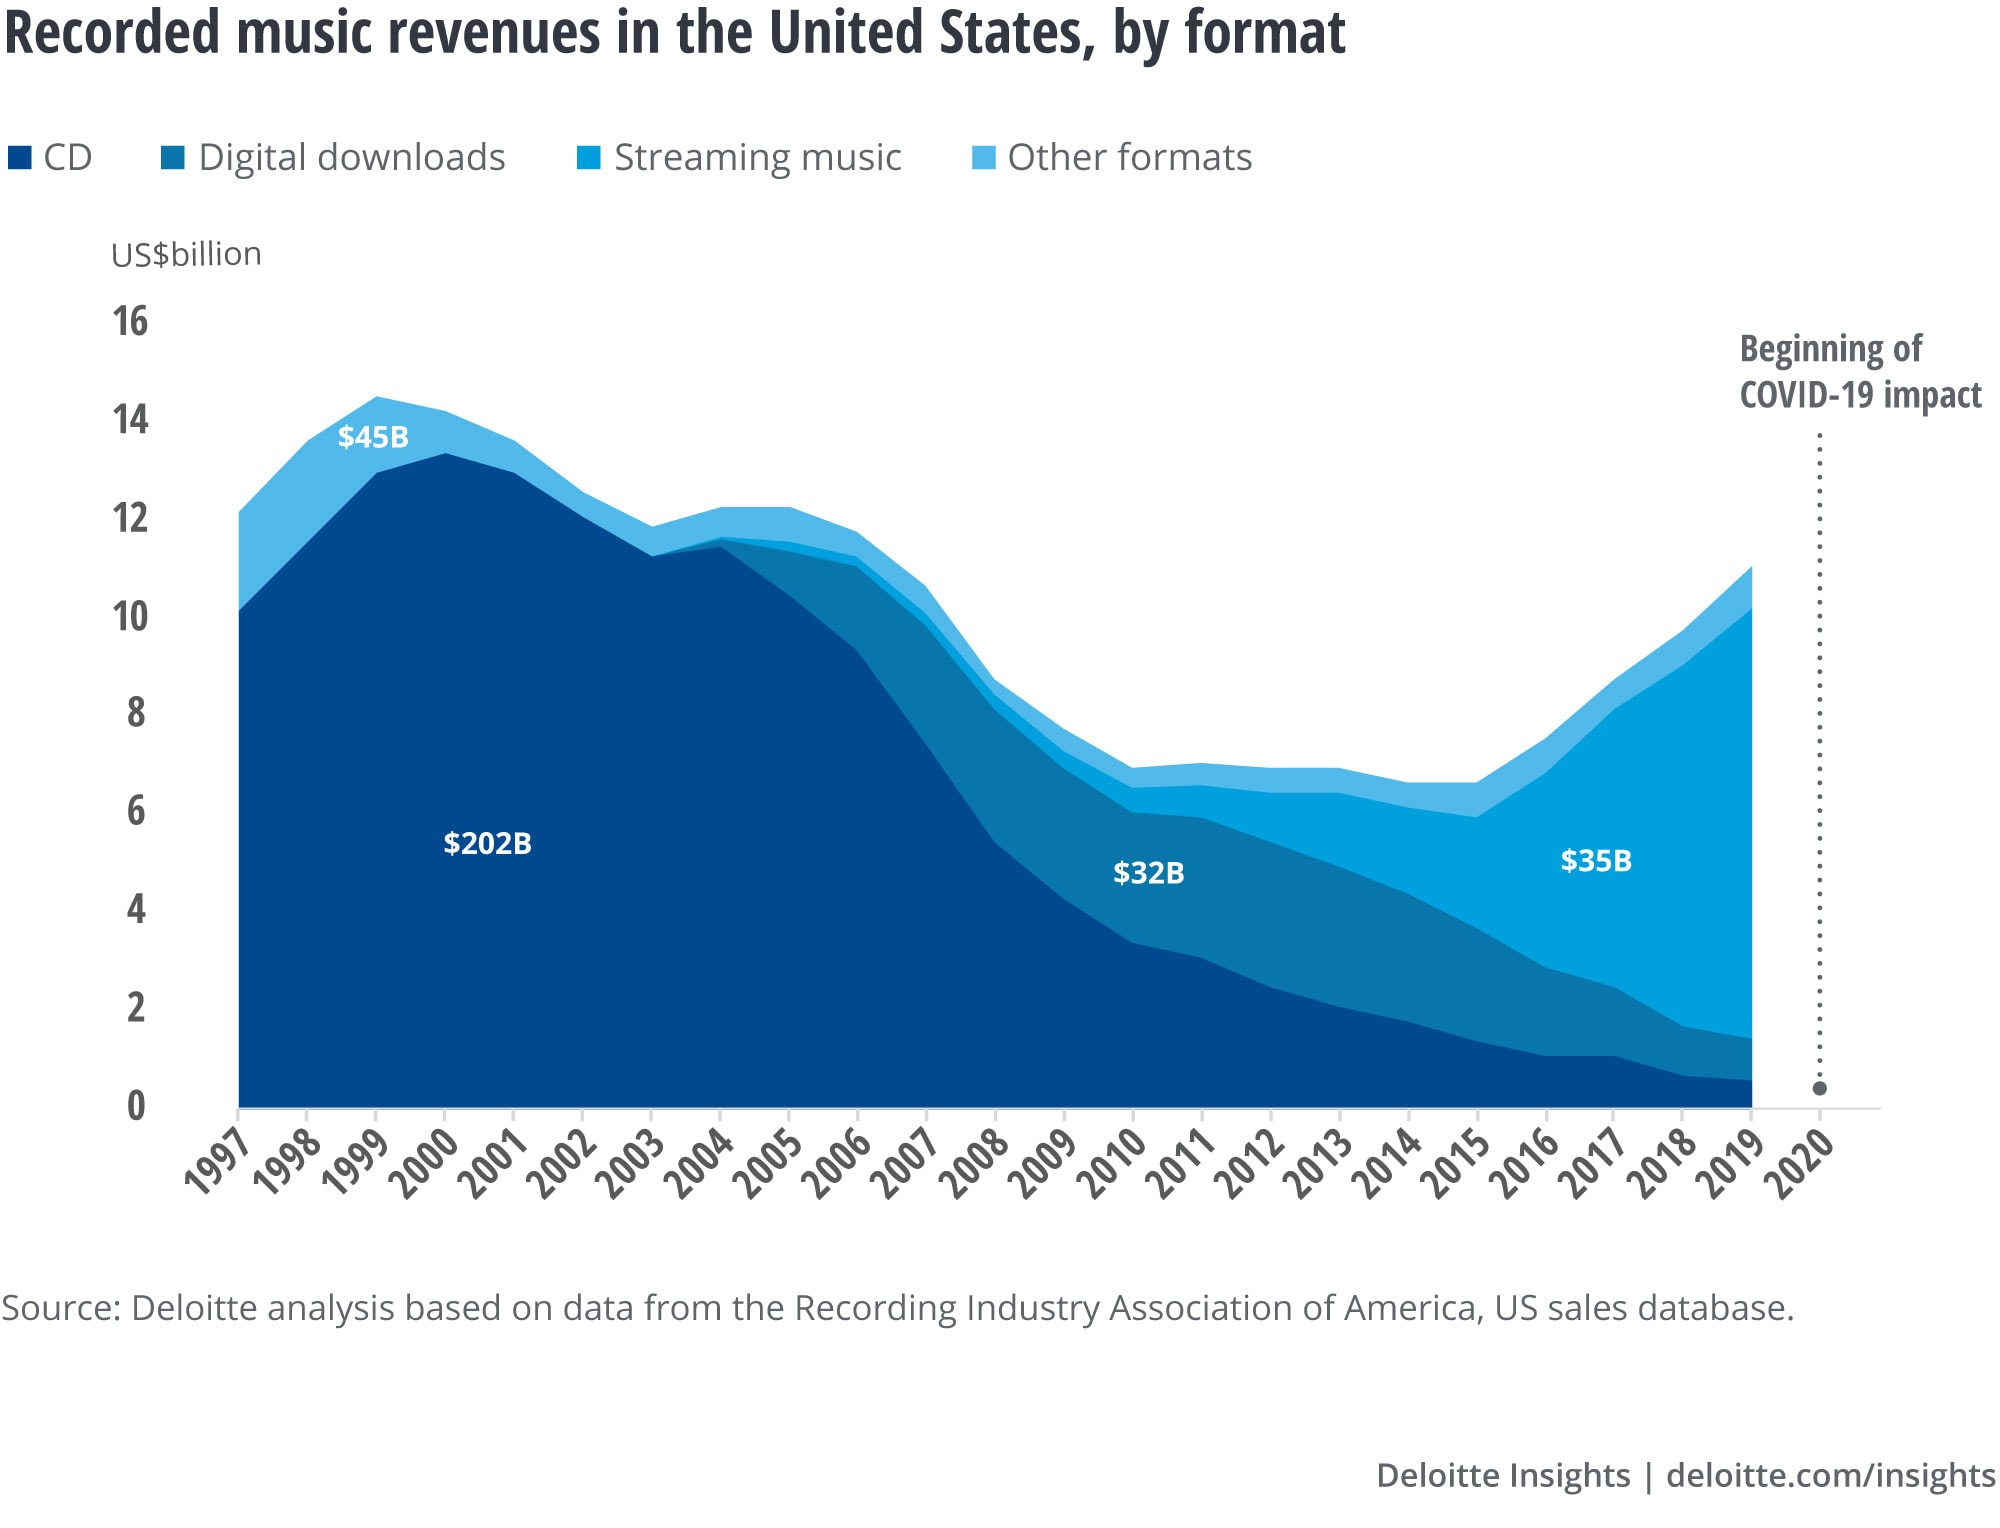 Since 2015, streaming services have fueled a turnaround for the US music industry. Their role has become even more crucial in the current crisis